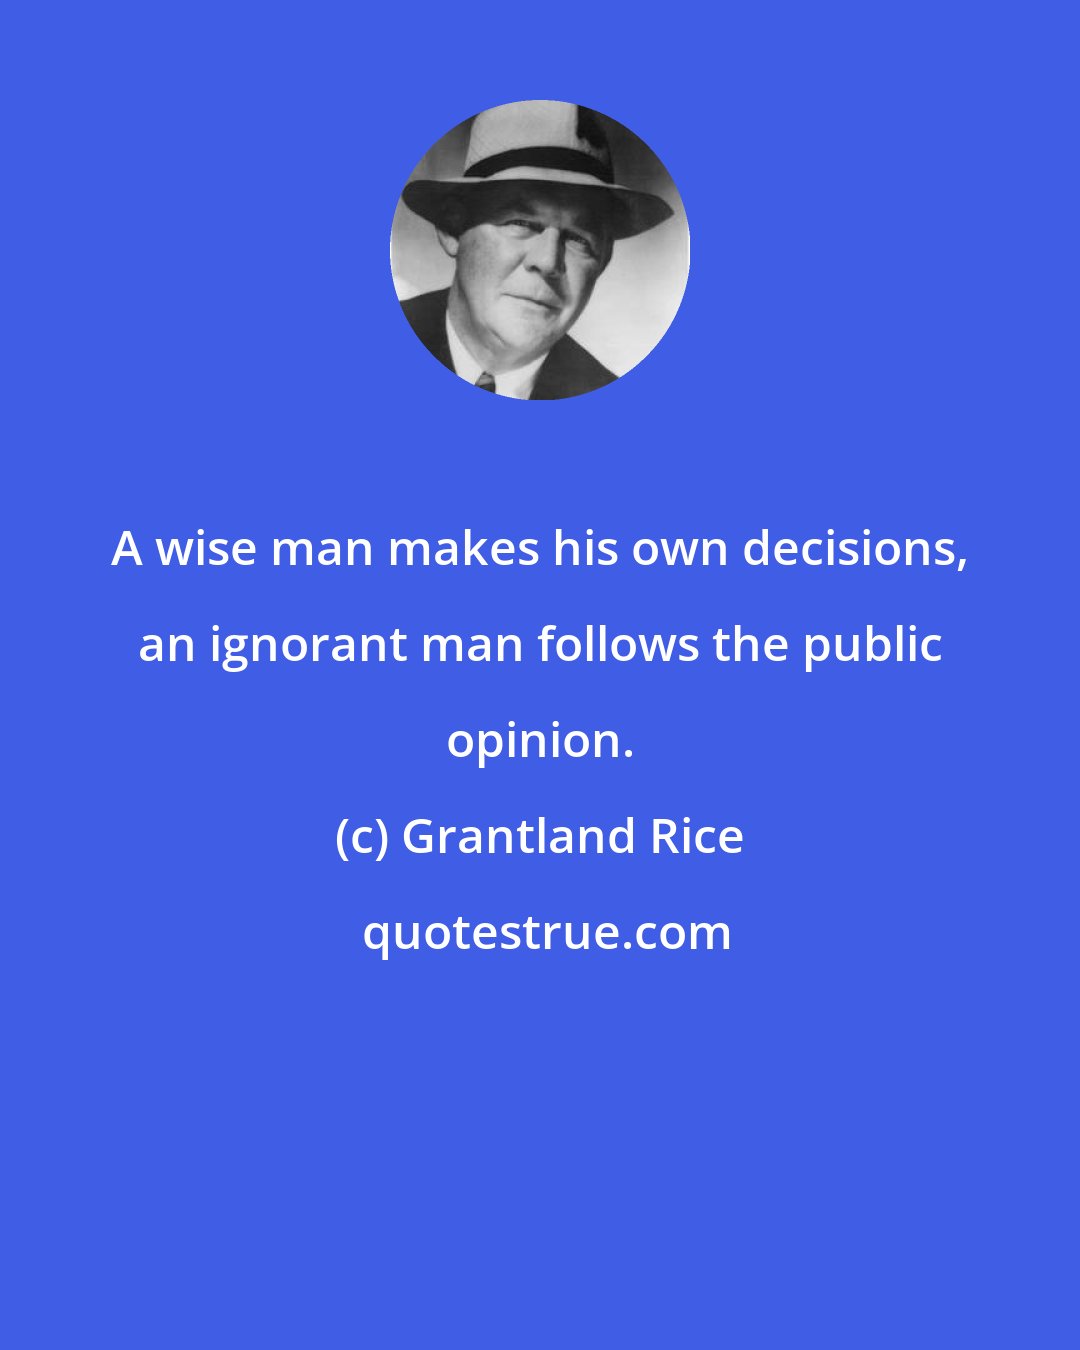 Grantland Rice: A wise man makes his own decisions, an ignorant man follows the public opinion.